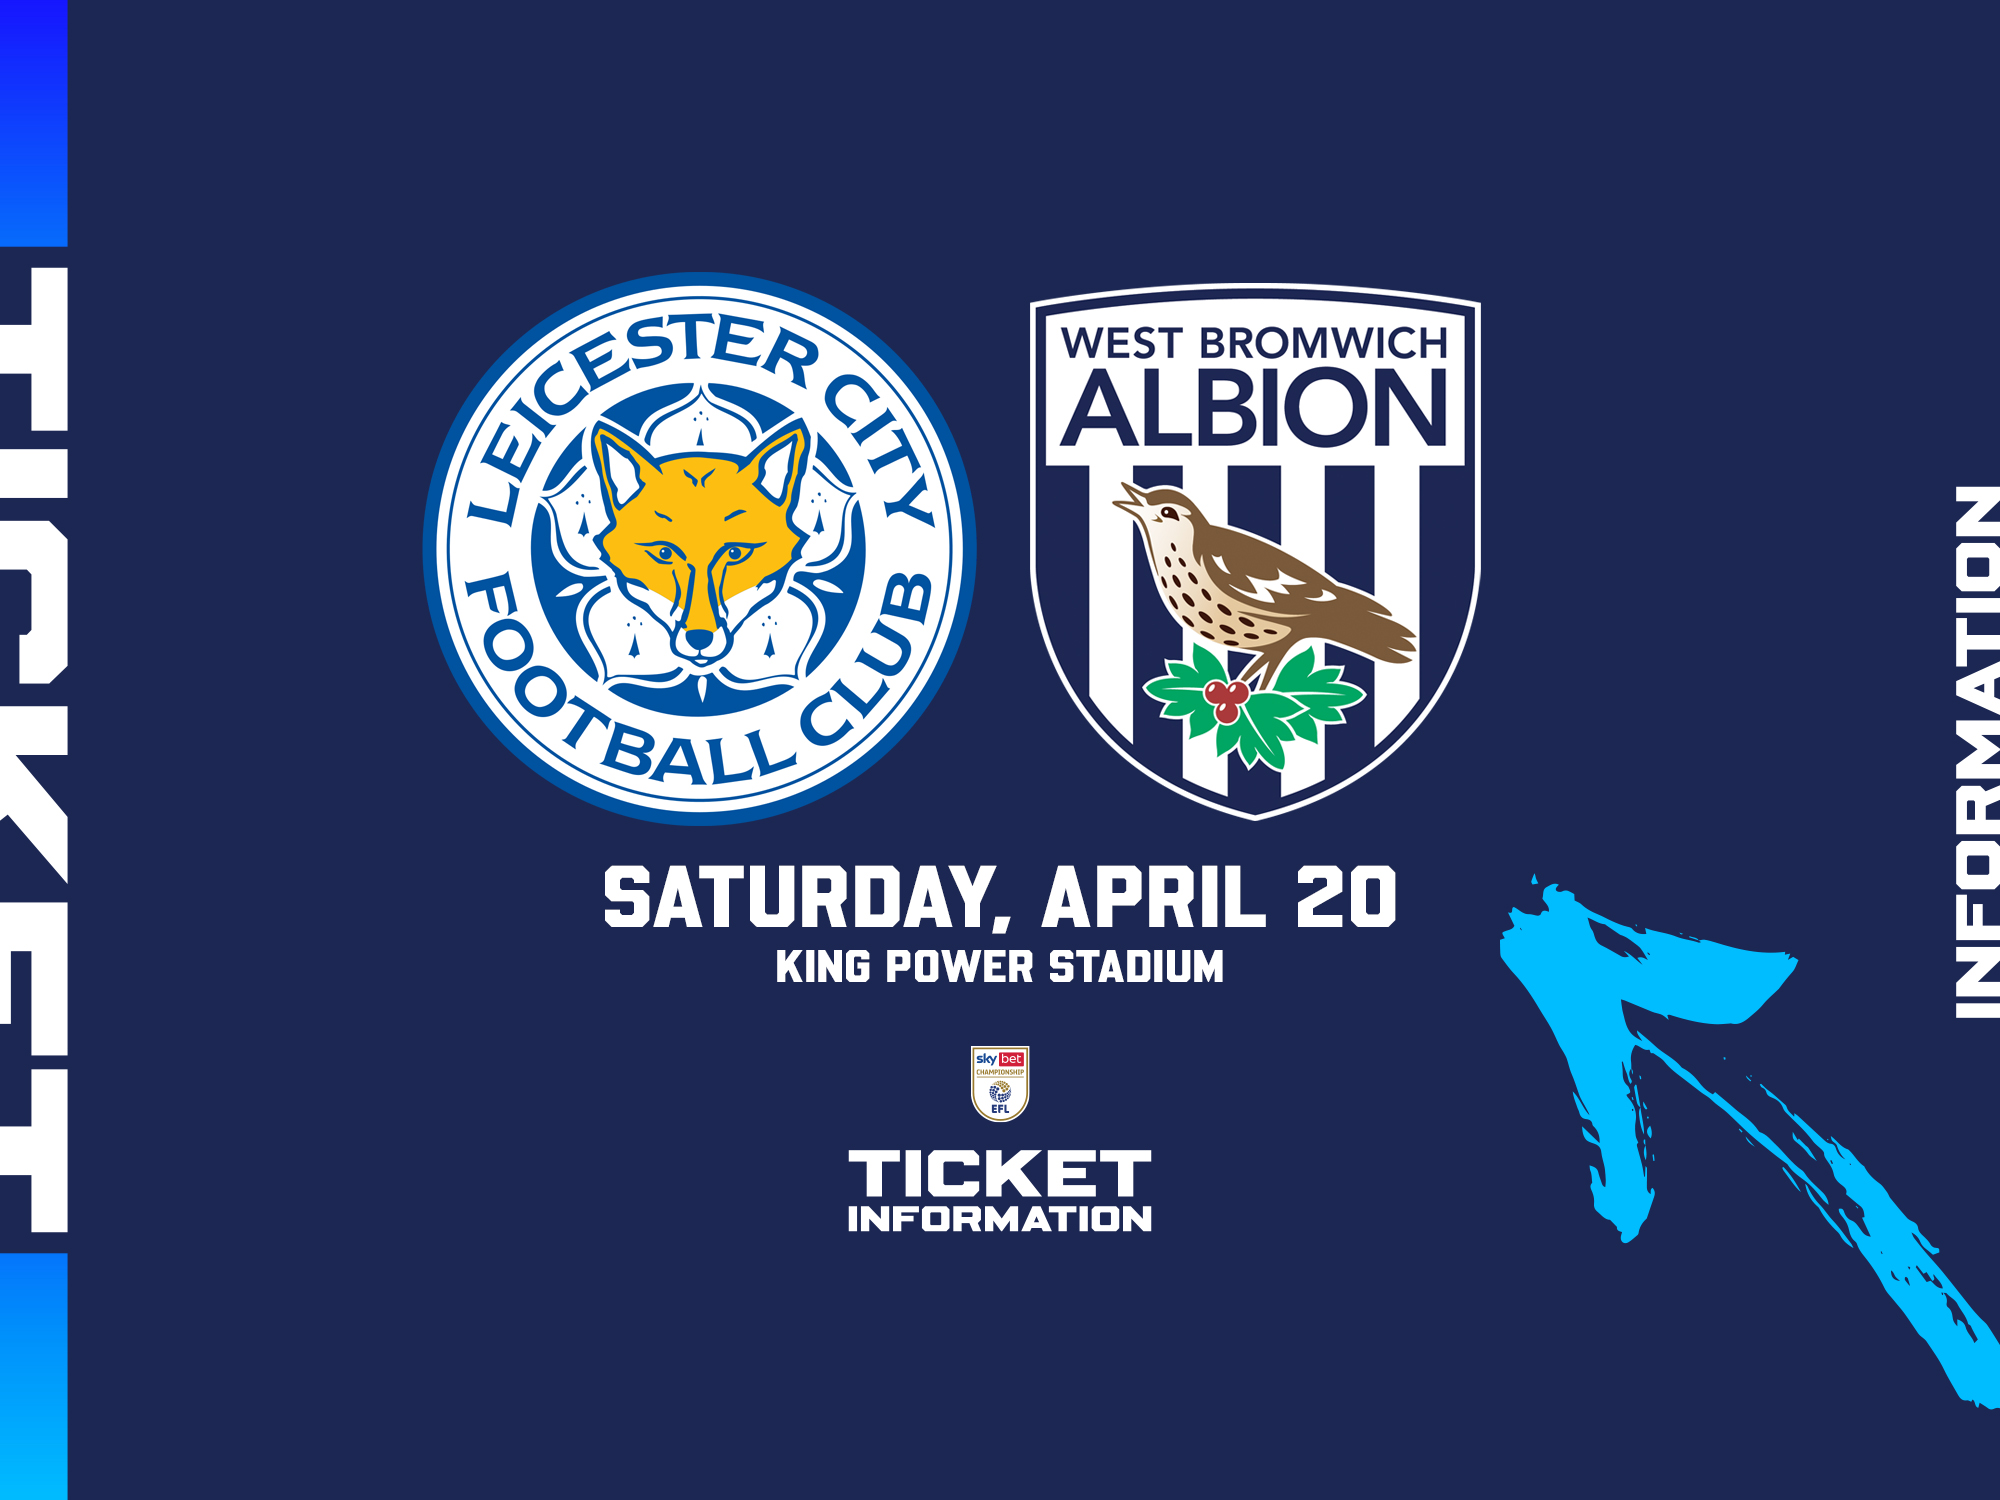 A ticket graphic displaying information for Albion's game against Leicester